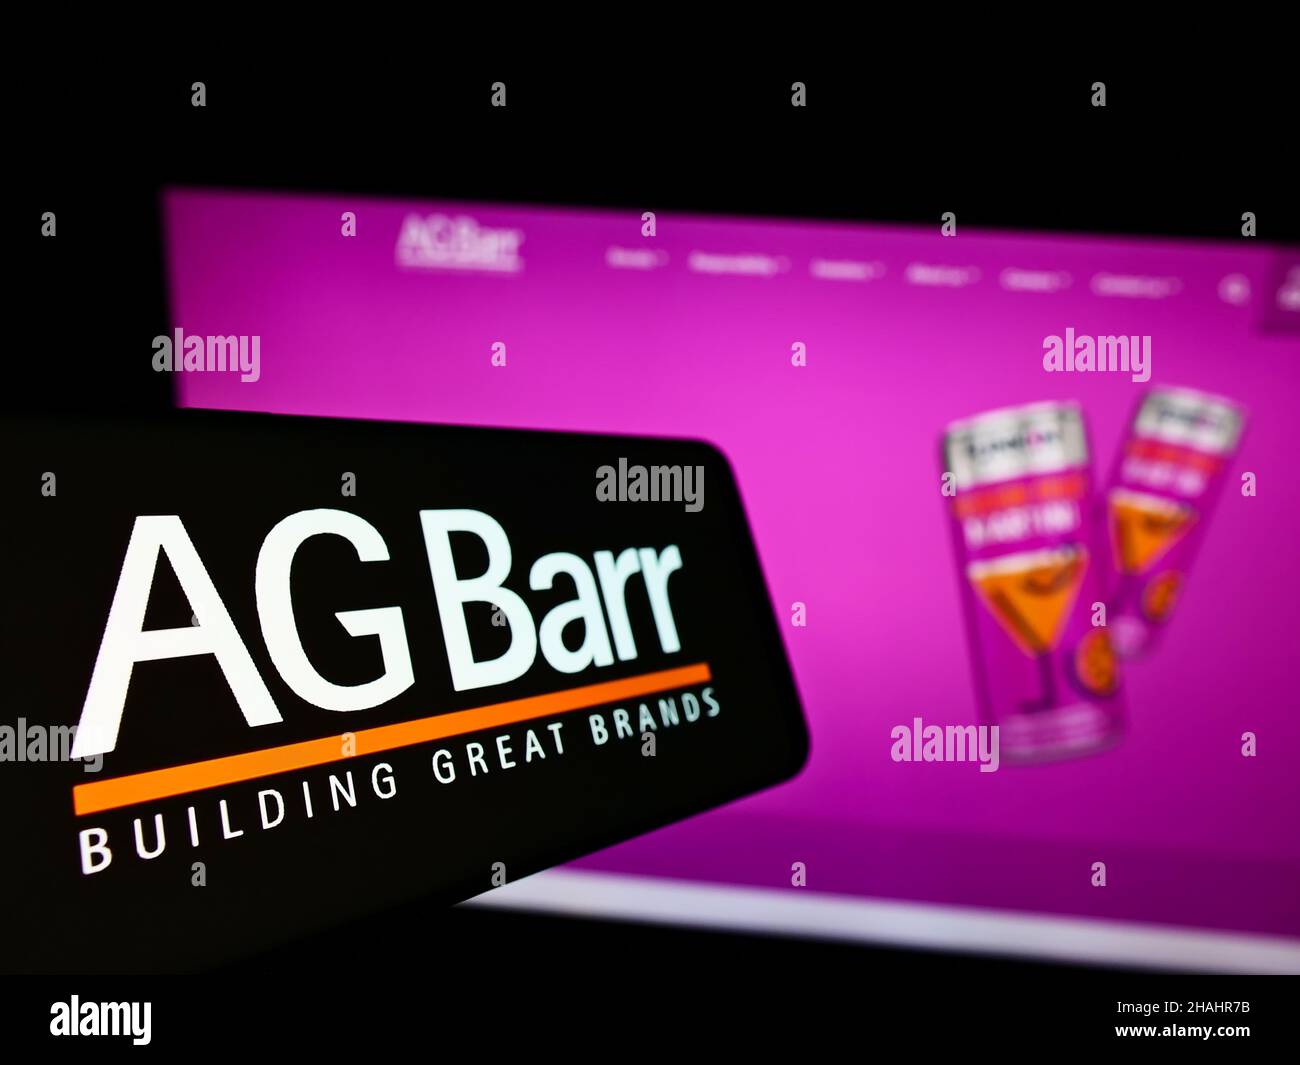 Smartphone with logo of British soft drink company A.G. Barr plc on screen in front of business website. Focus on left of phone display. Stock Photo